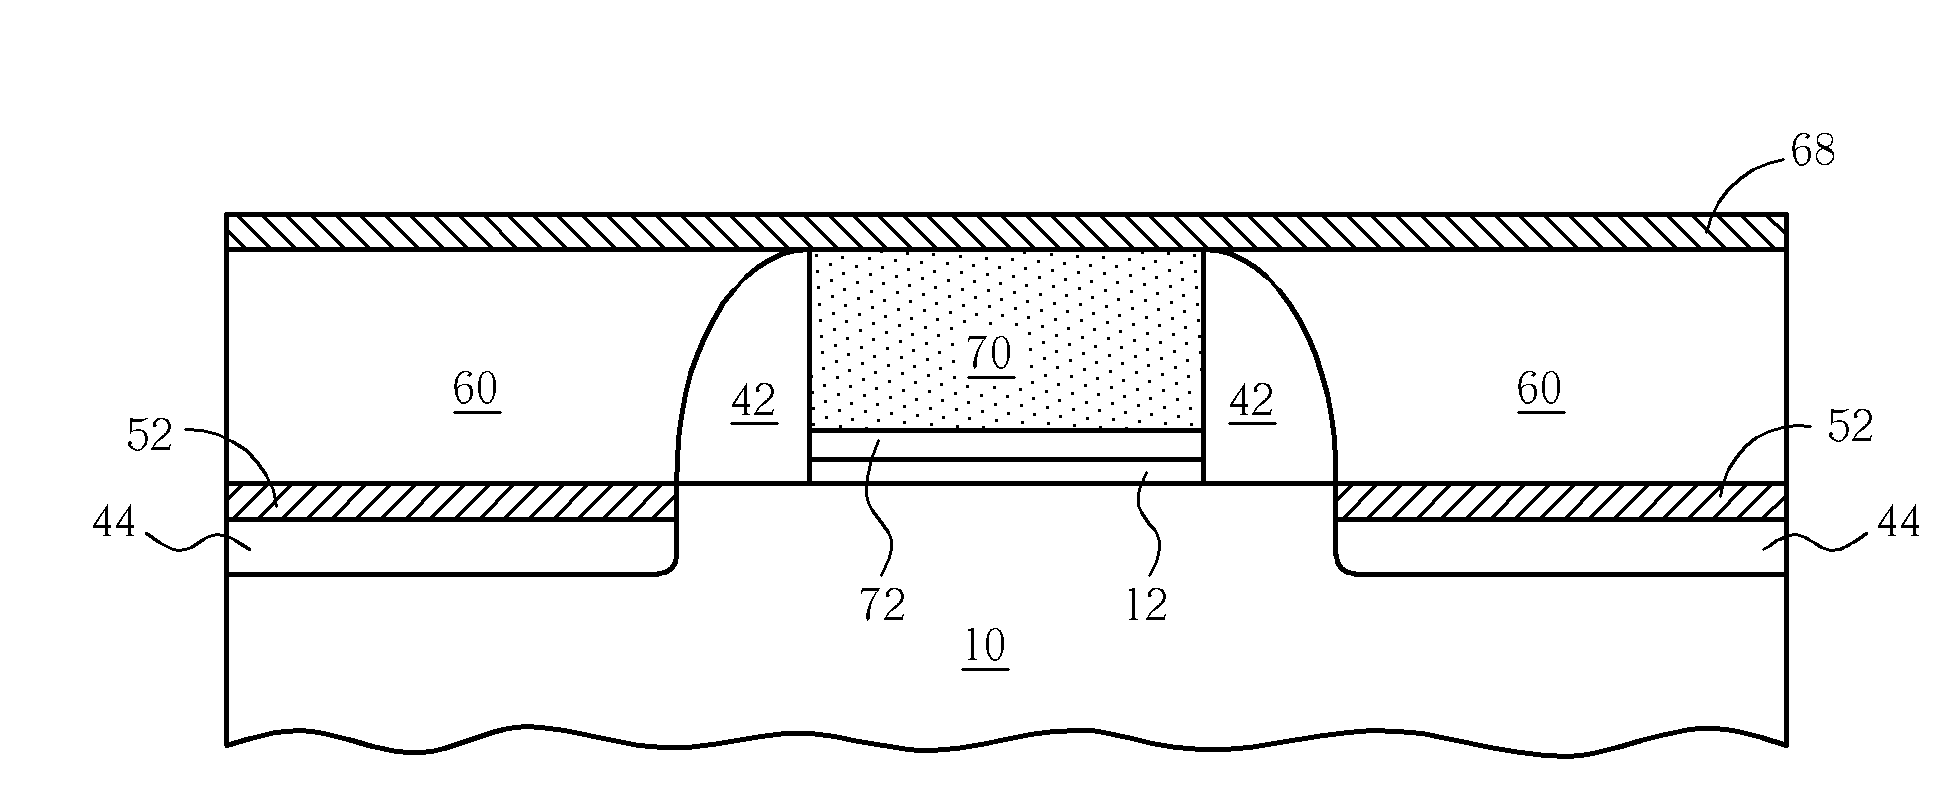 Method for forming fully silicided gate electrode in a semiconductor device